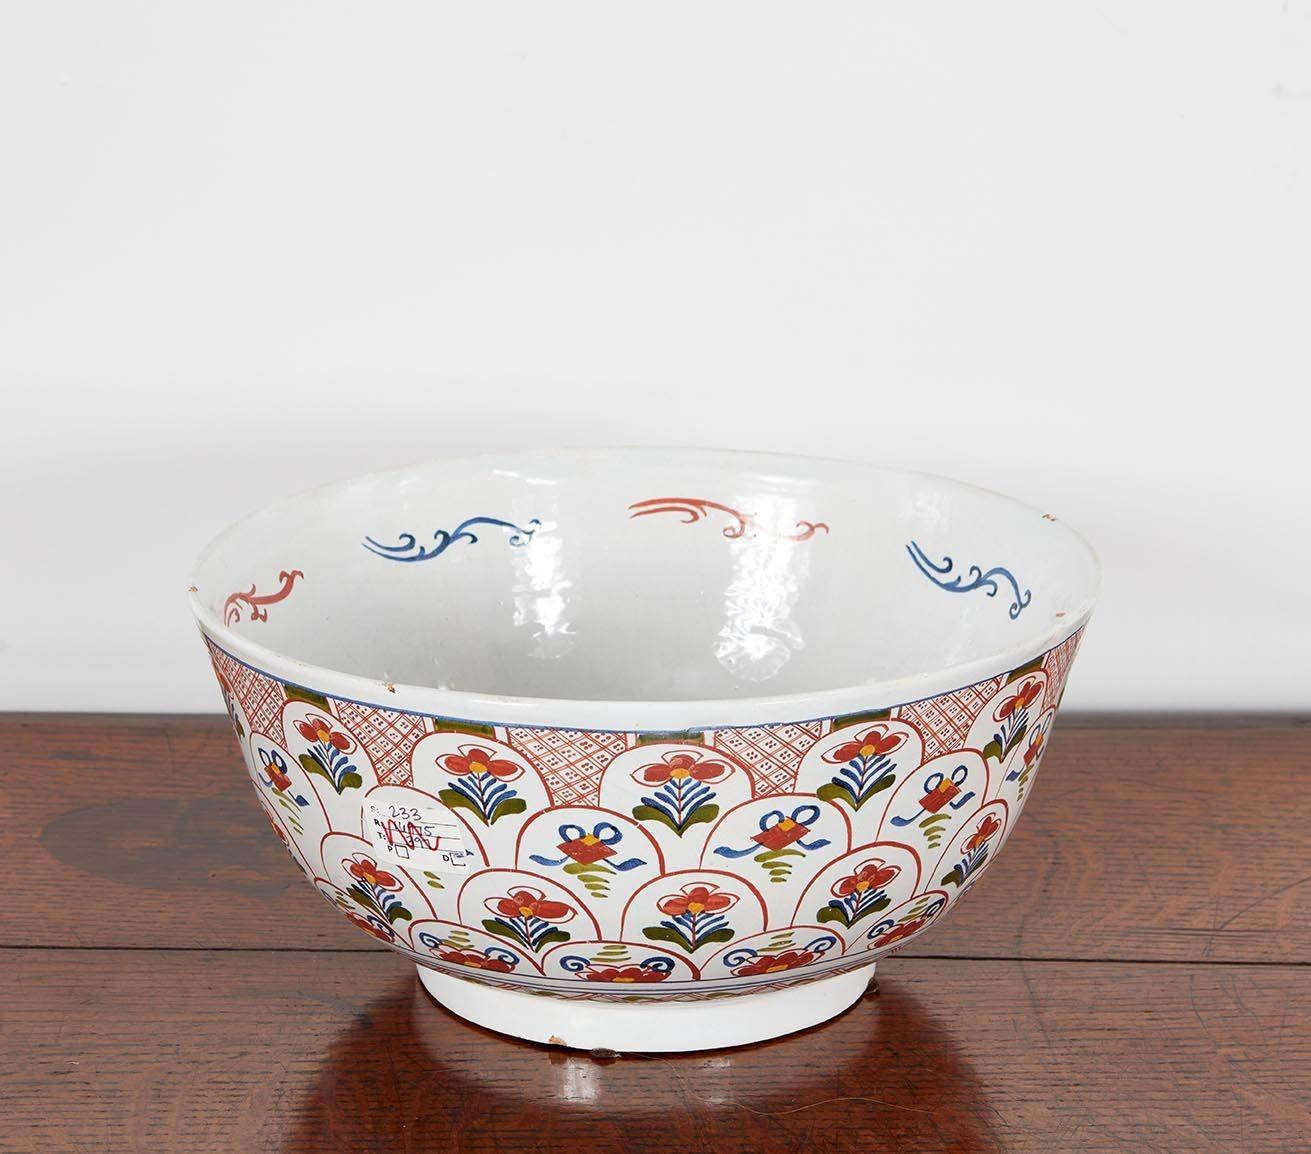 Late 18th Century 18th c. English Delft Polychrome Punch Bowl For Sale